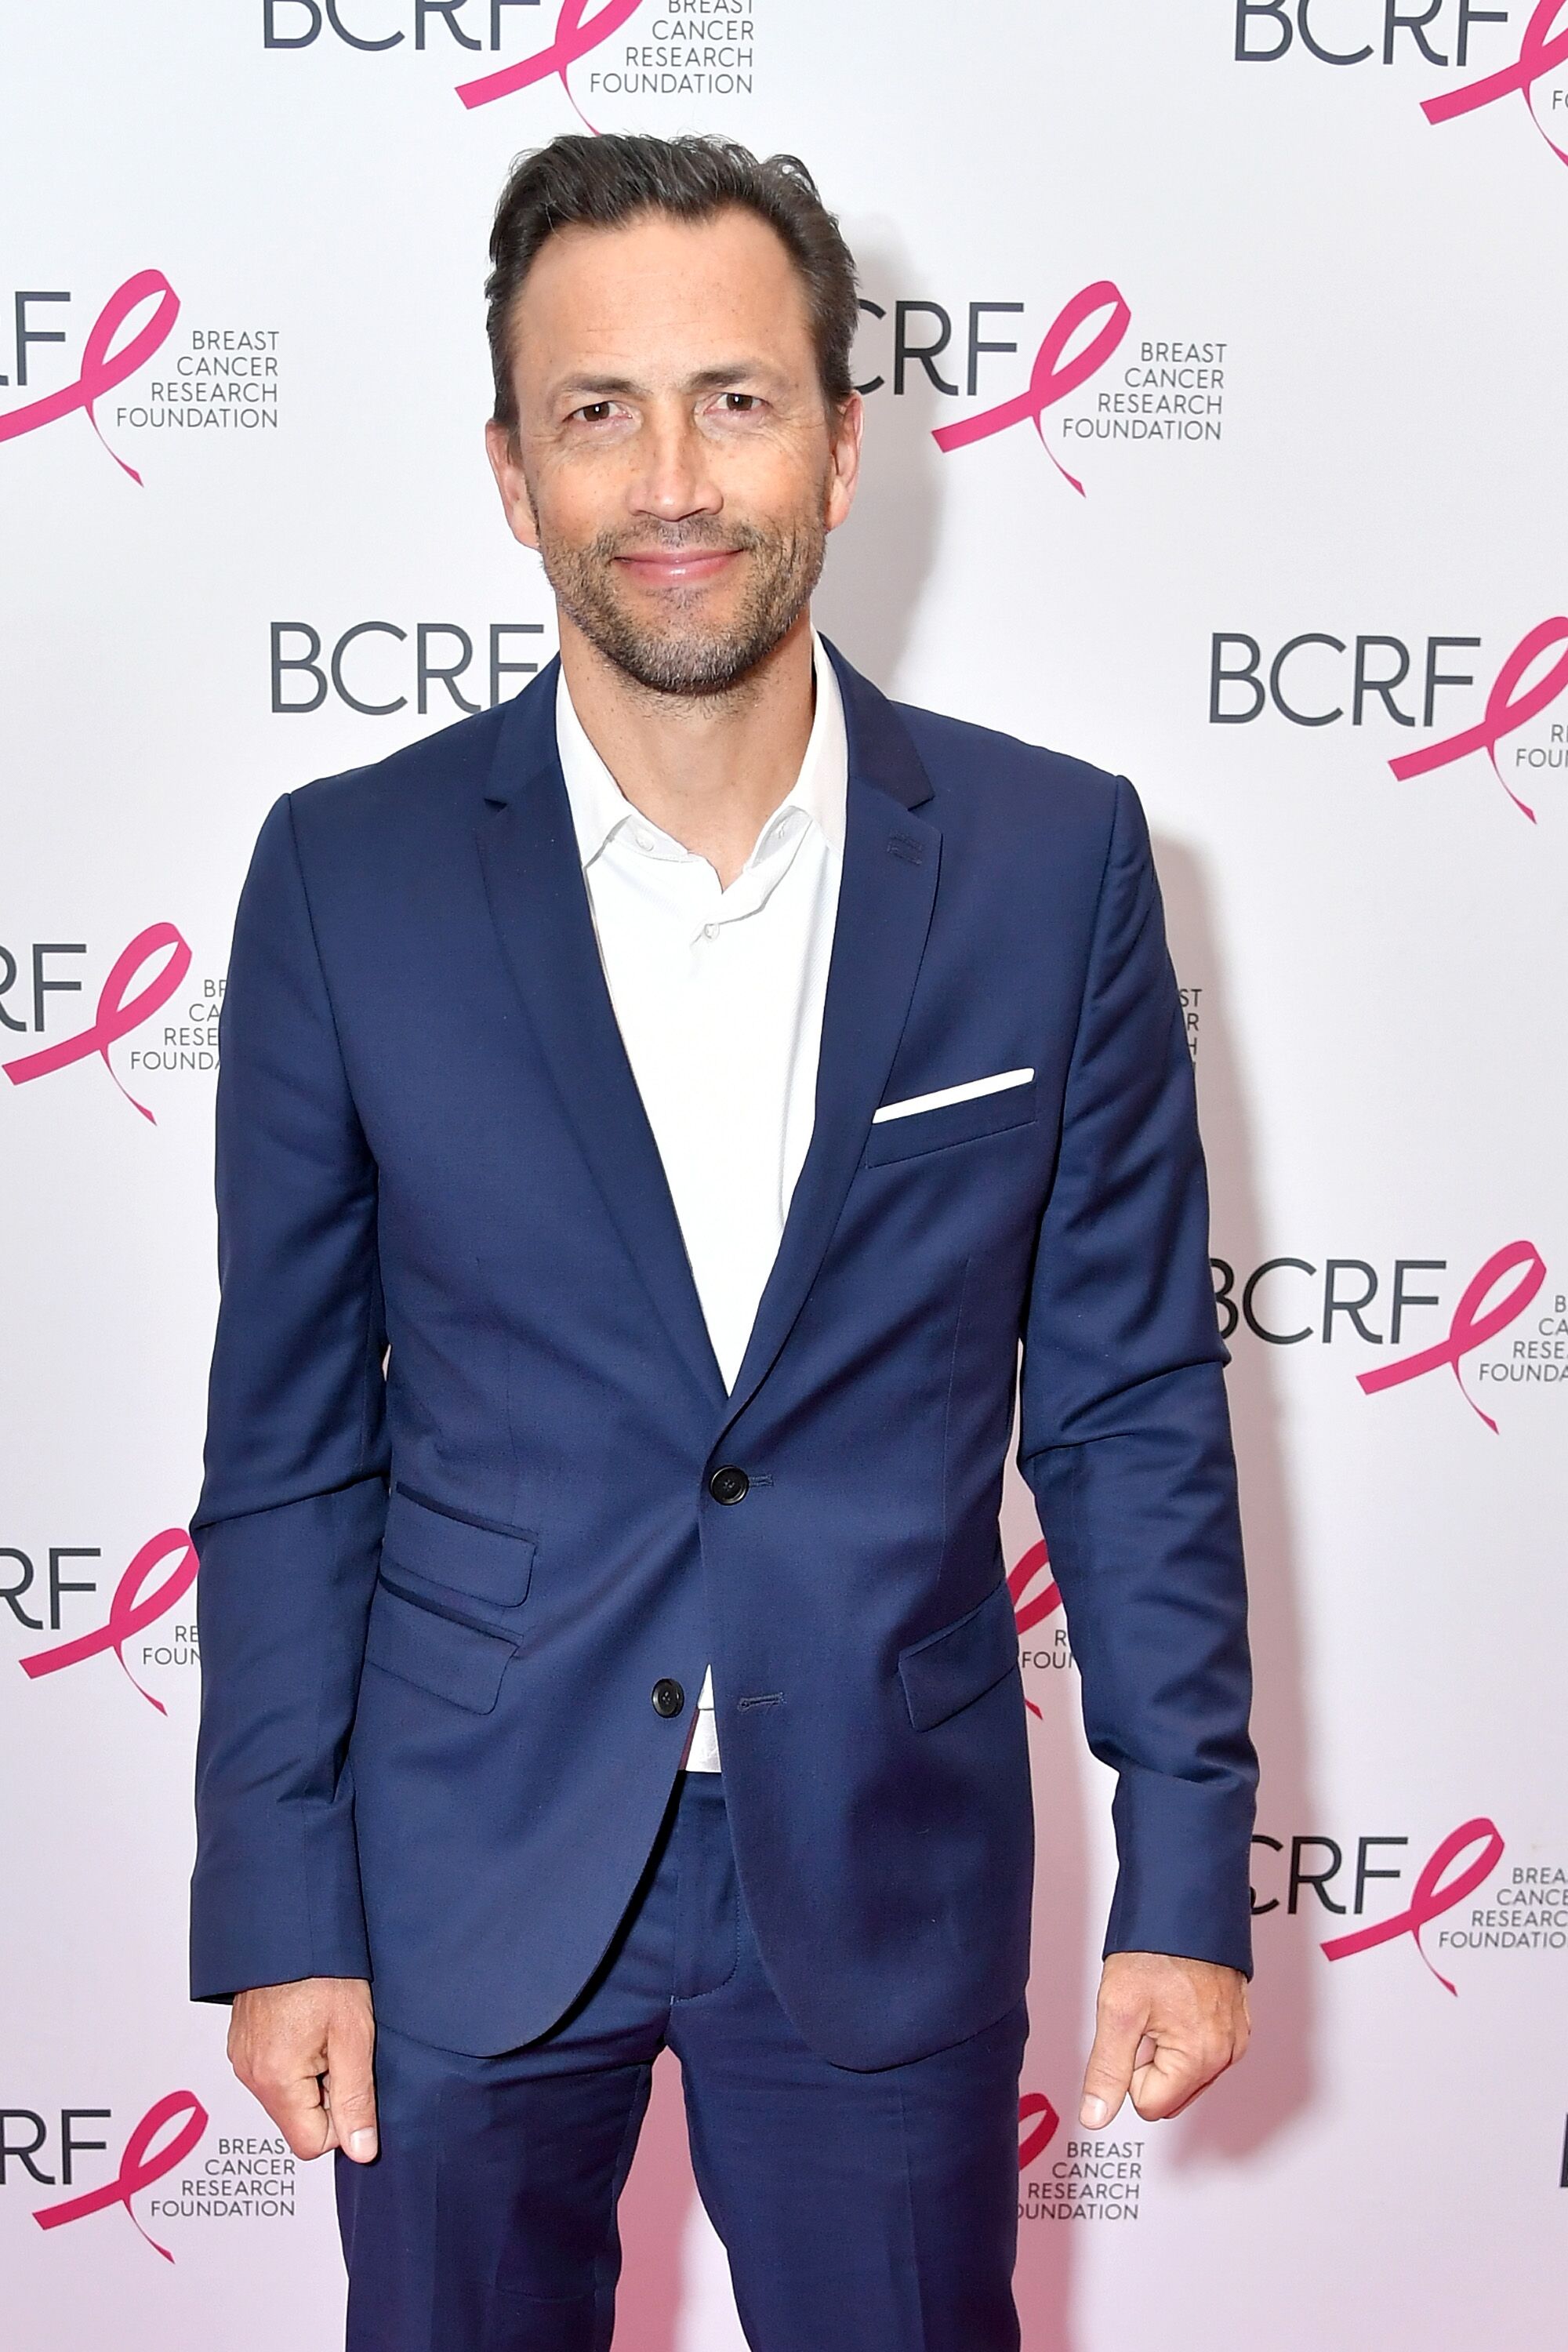 Andrew Shue at the Breast Cancer Research Foundation New York Symposium & Awards in 2018 | Source: Getty Images